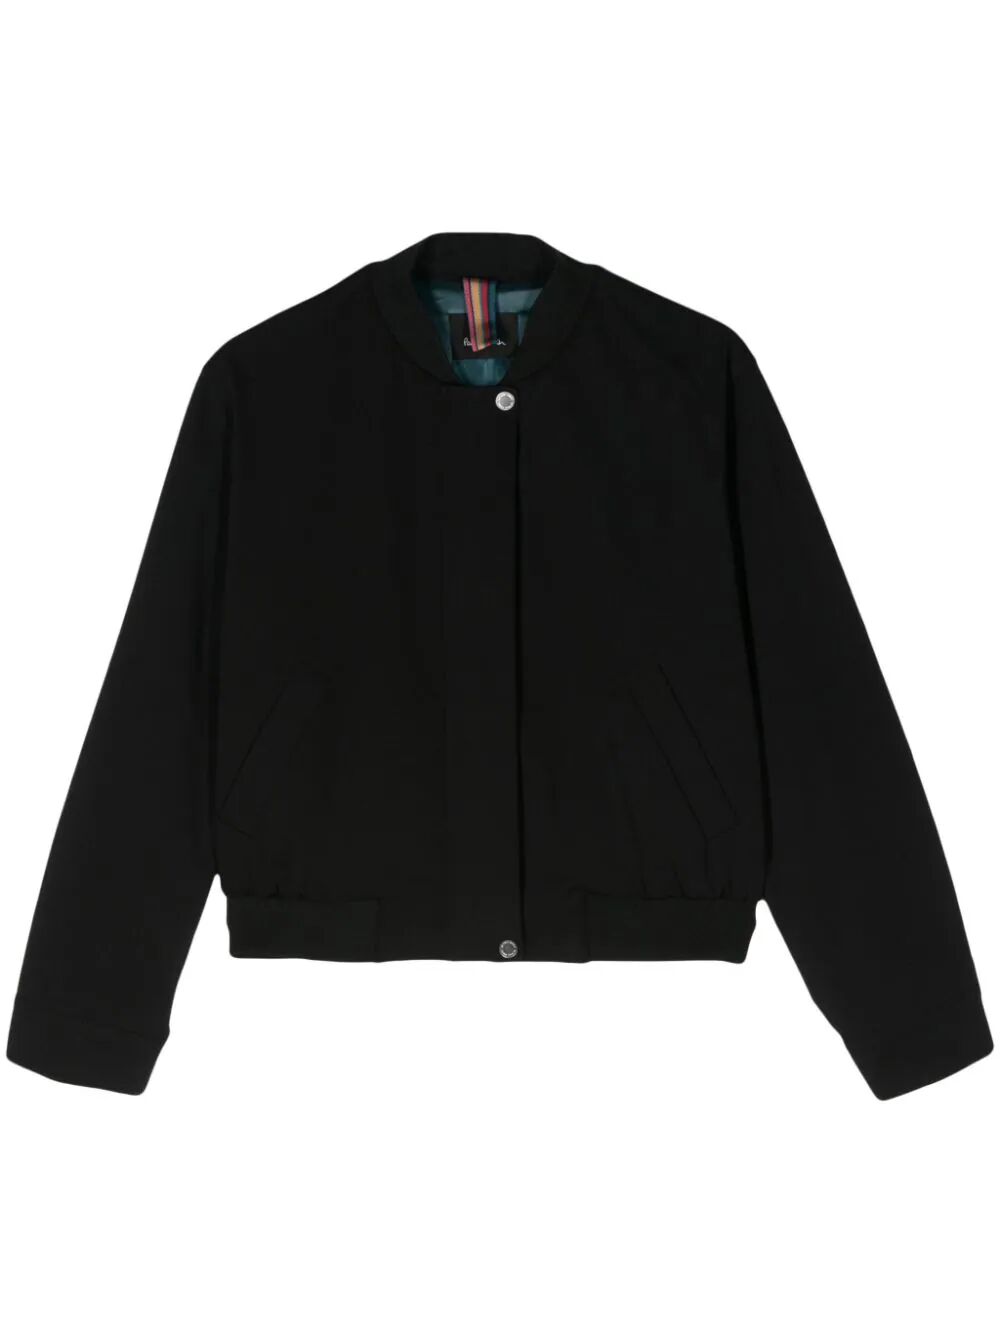 Ps By Paul Smith Jacket In Black